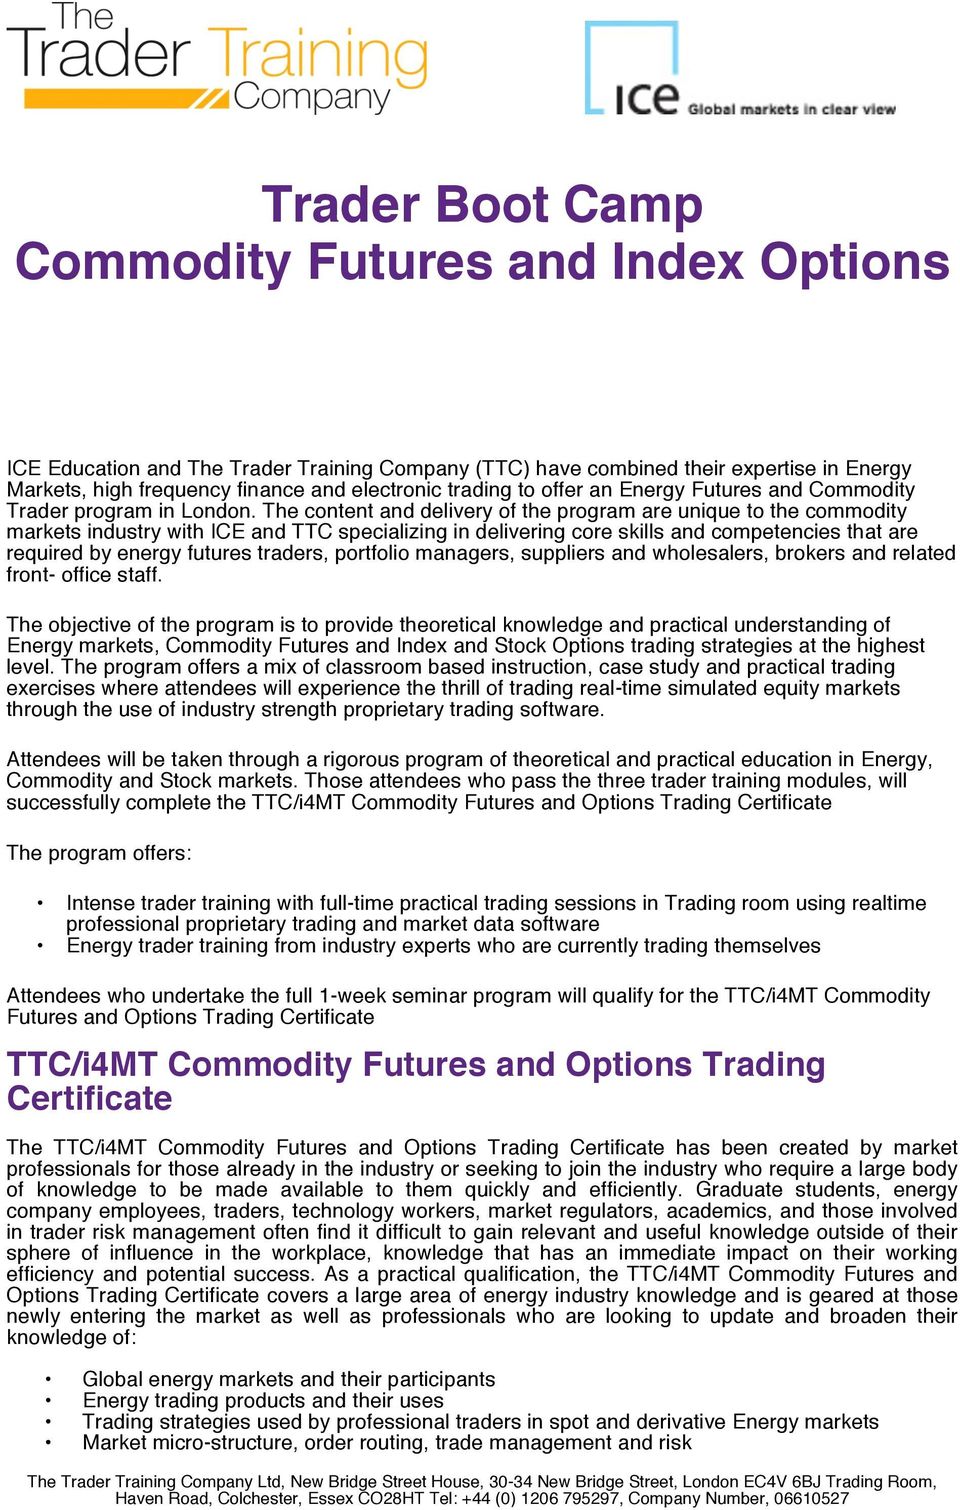 The content and delivery of the program are unique to the commodity markets industry with ICE and TTC specializing in delivering core skills and competencies that are required by energy futures